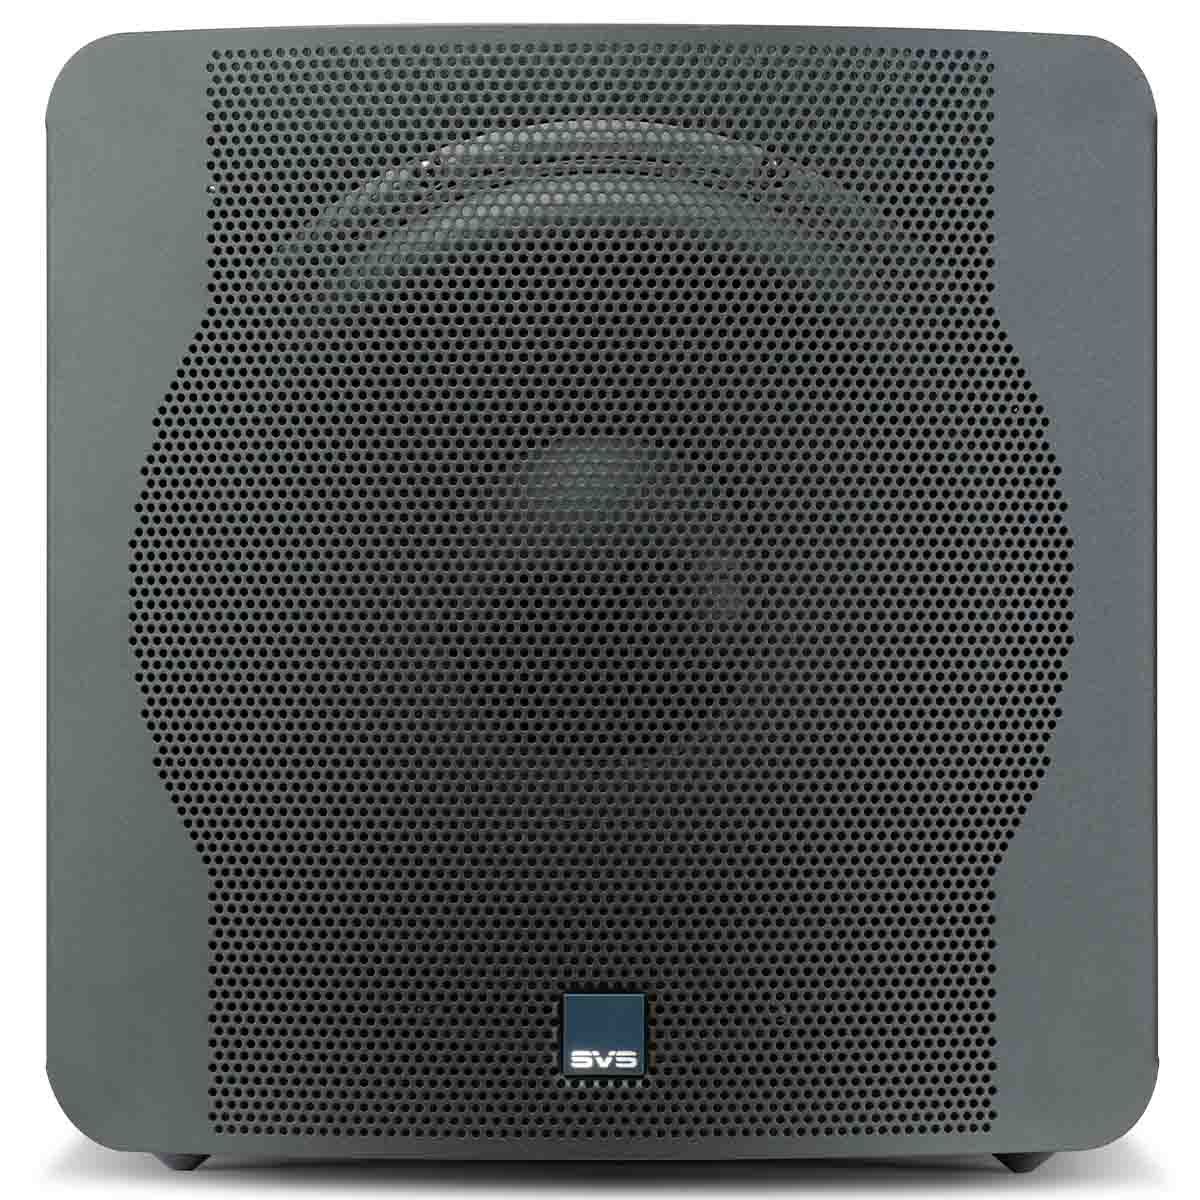 SVS SB-2000 12" Compact Sealed Subwoofer - Premium Black Ash - front view with grille